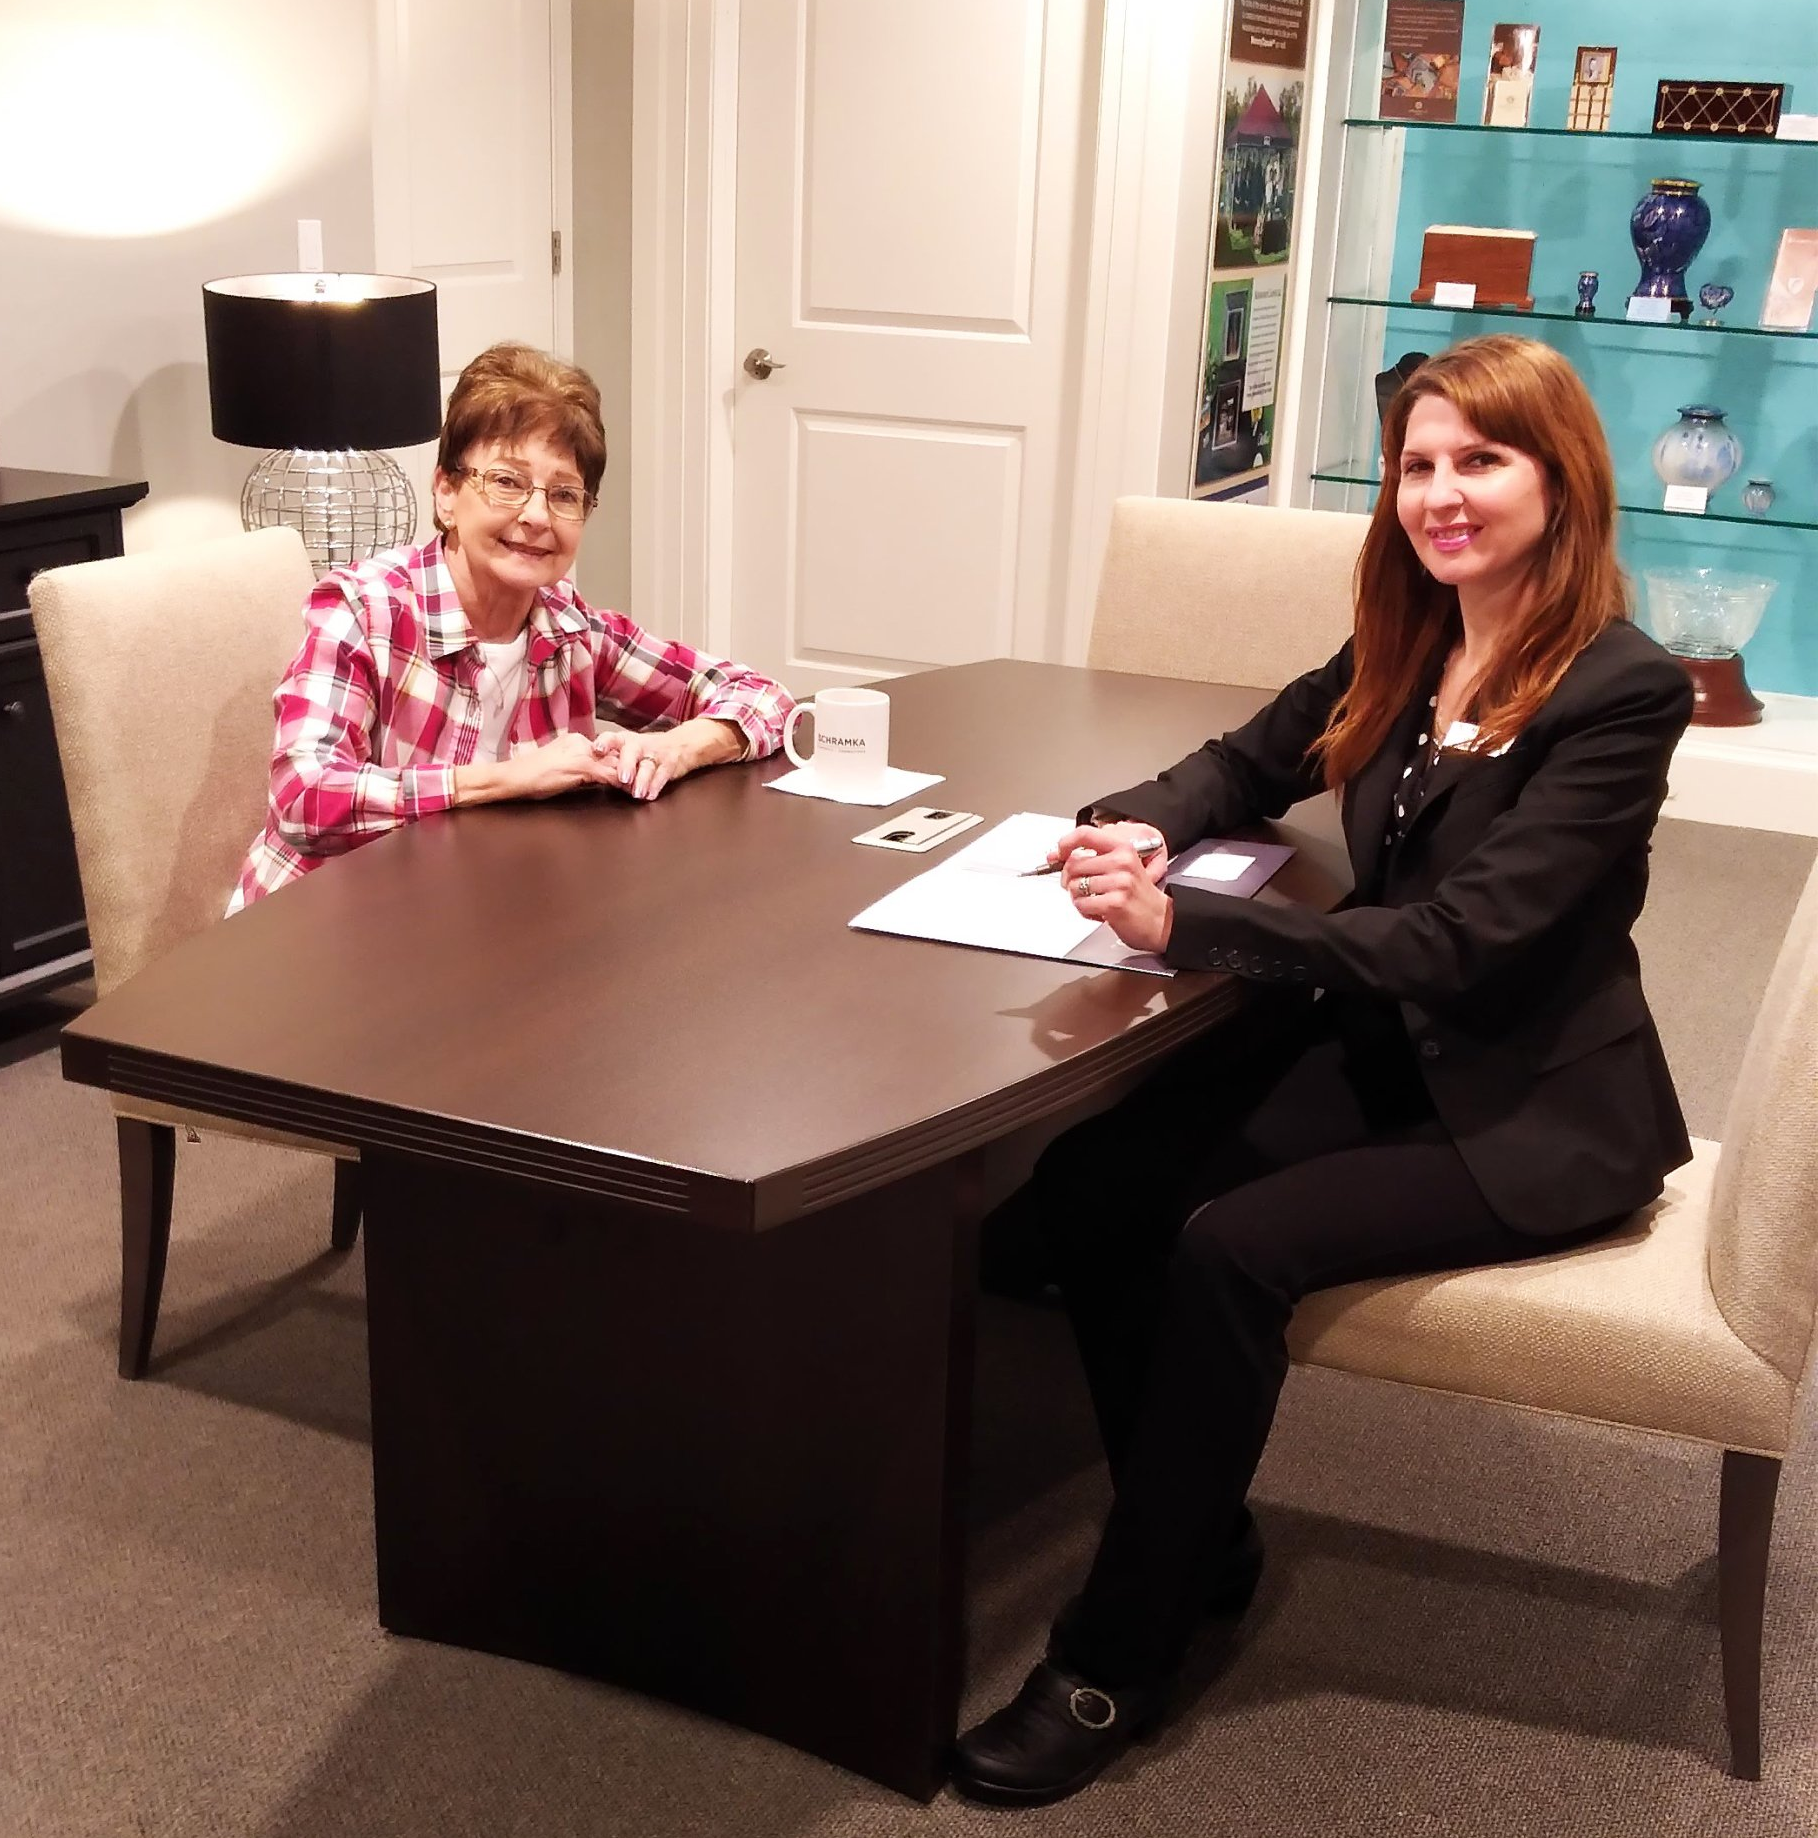 preplanning specialist kelly teague explains the benefit to a client